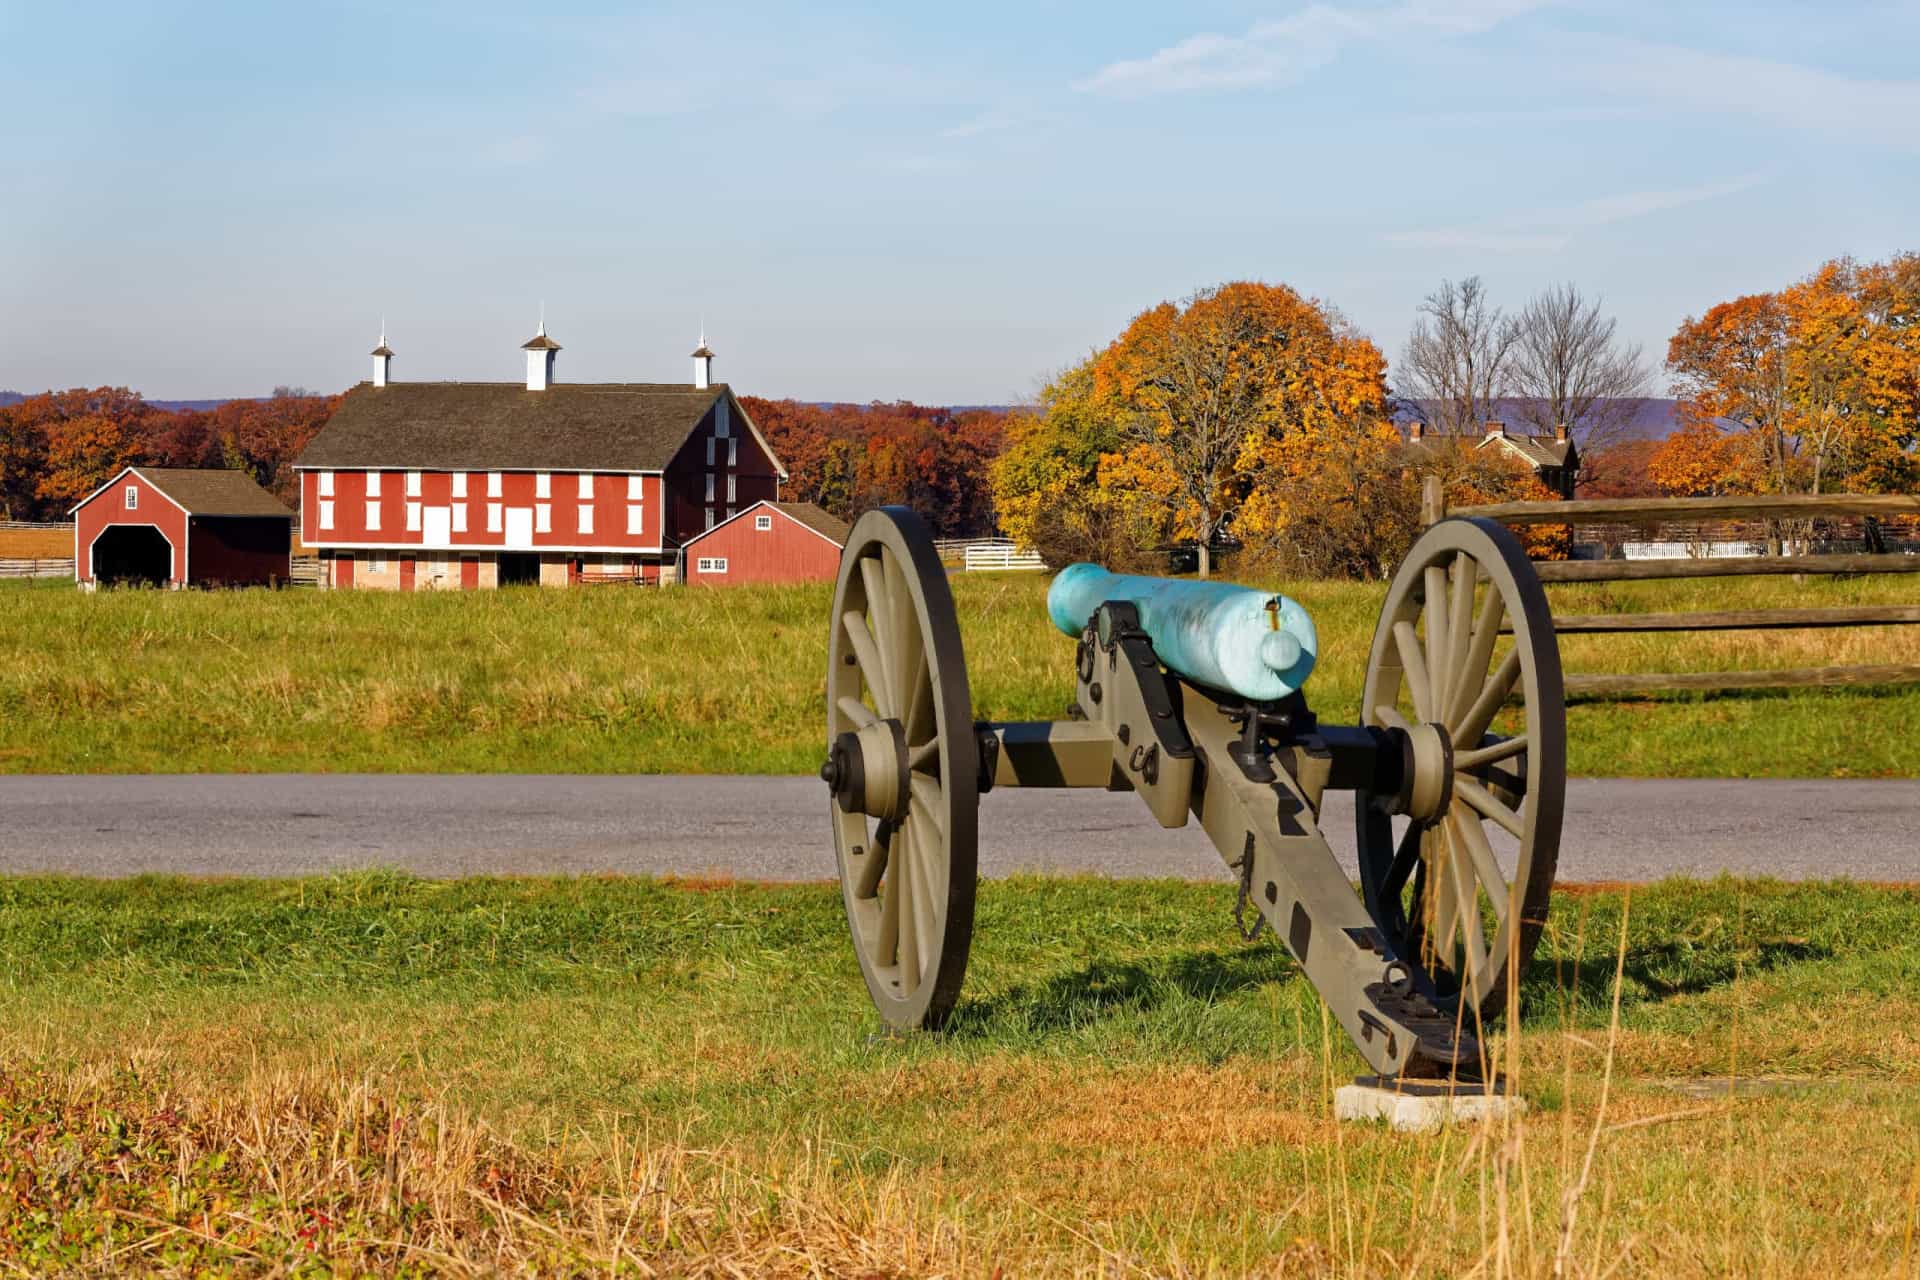 <p>It is estimated that around 50,000 men died or were severely injured in the Battle of Gettysburg in 1863. A number of restless spirits, including that of General Isaac Ewell, are said to roam the Daniel Lady Farm area, which was a Confederate field hospital where thousands died.</p>